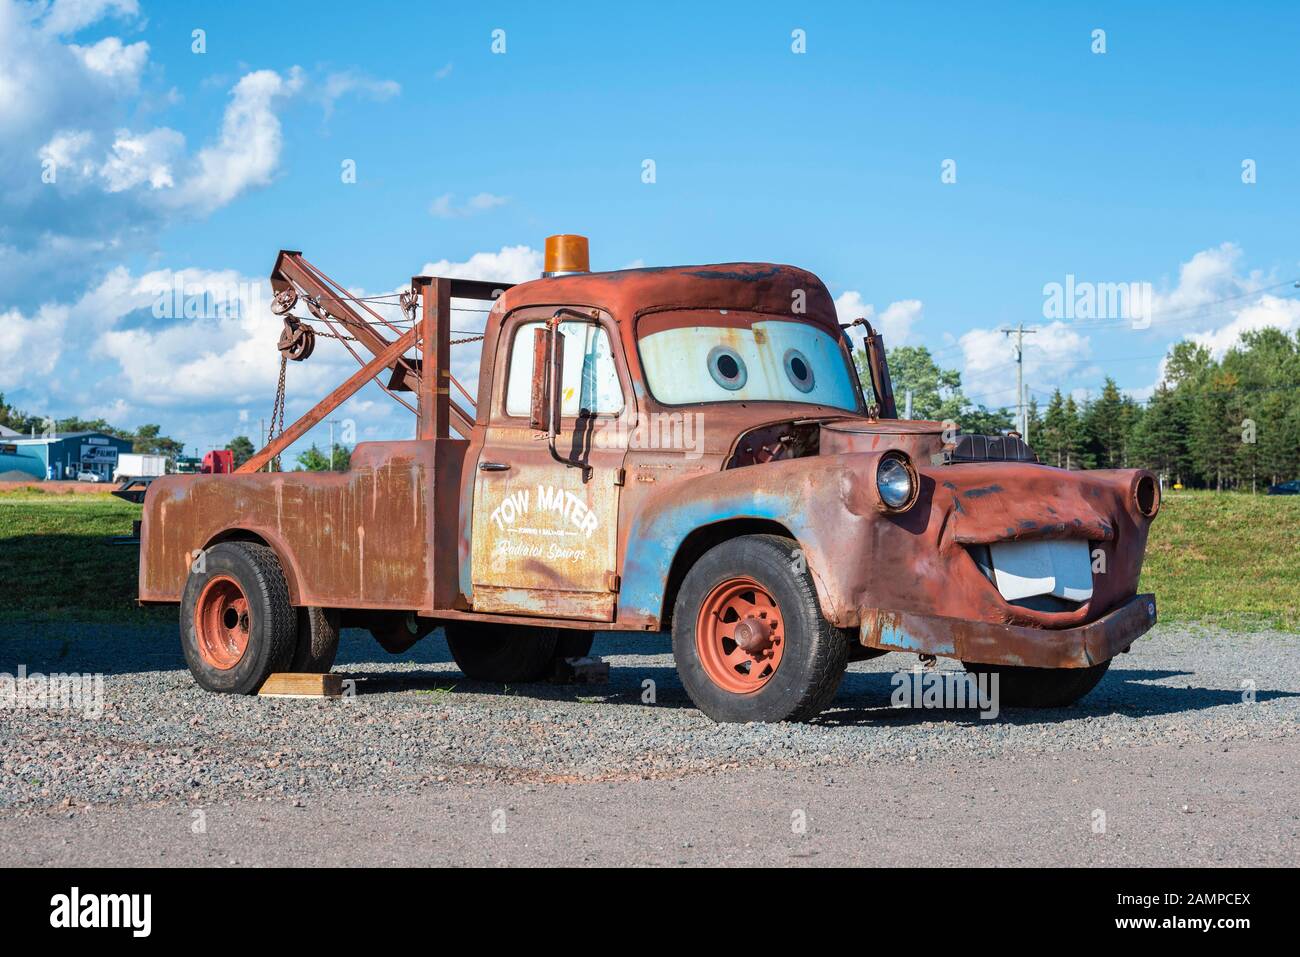 Reproduction of the comic figure Hook or Mater from the animated film Cars, Prince Edward Island, Canada Stock Photo